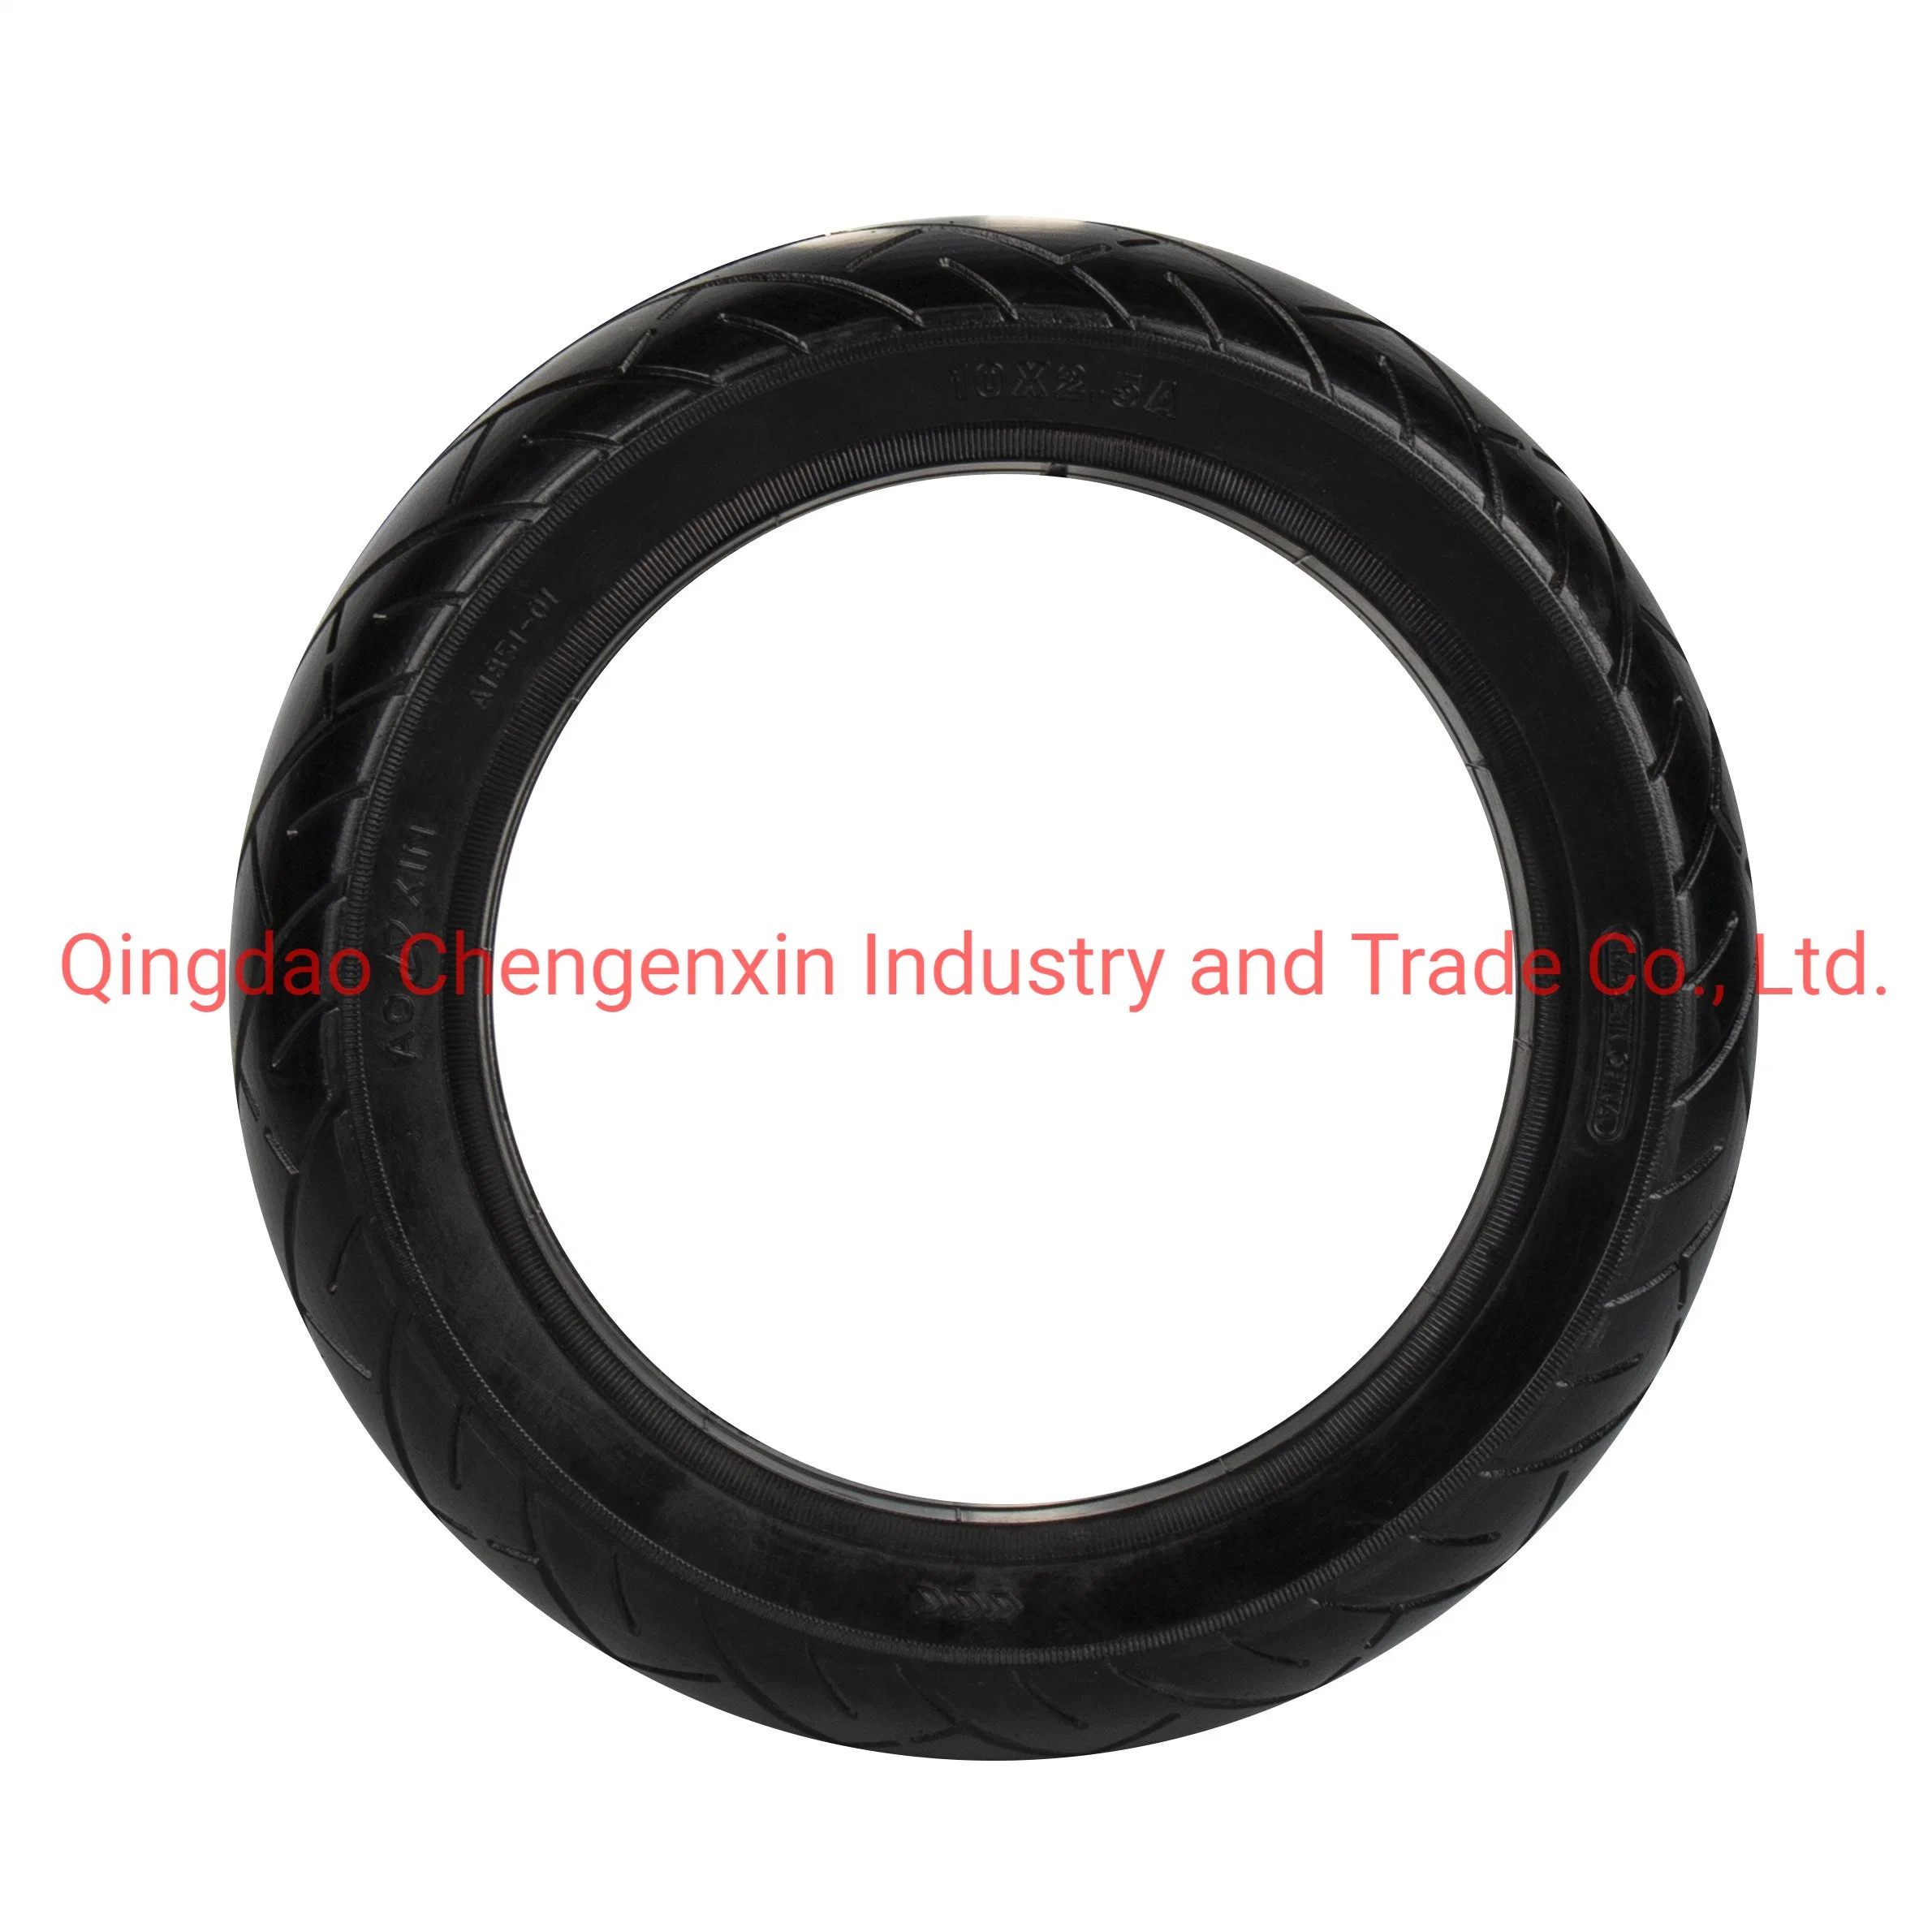 Xiaomi Electric Scooter Inner Tube 8 1/2X2 Thickened Inner and Outer Tires Scooter Common Tire Accessories